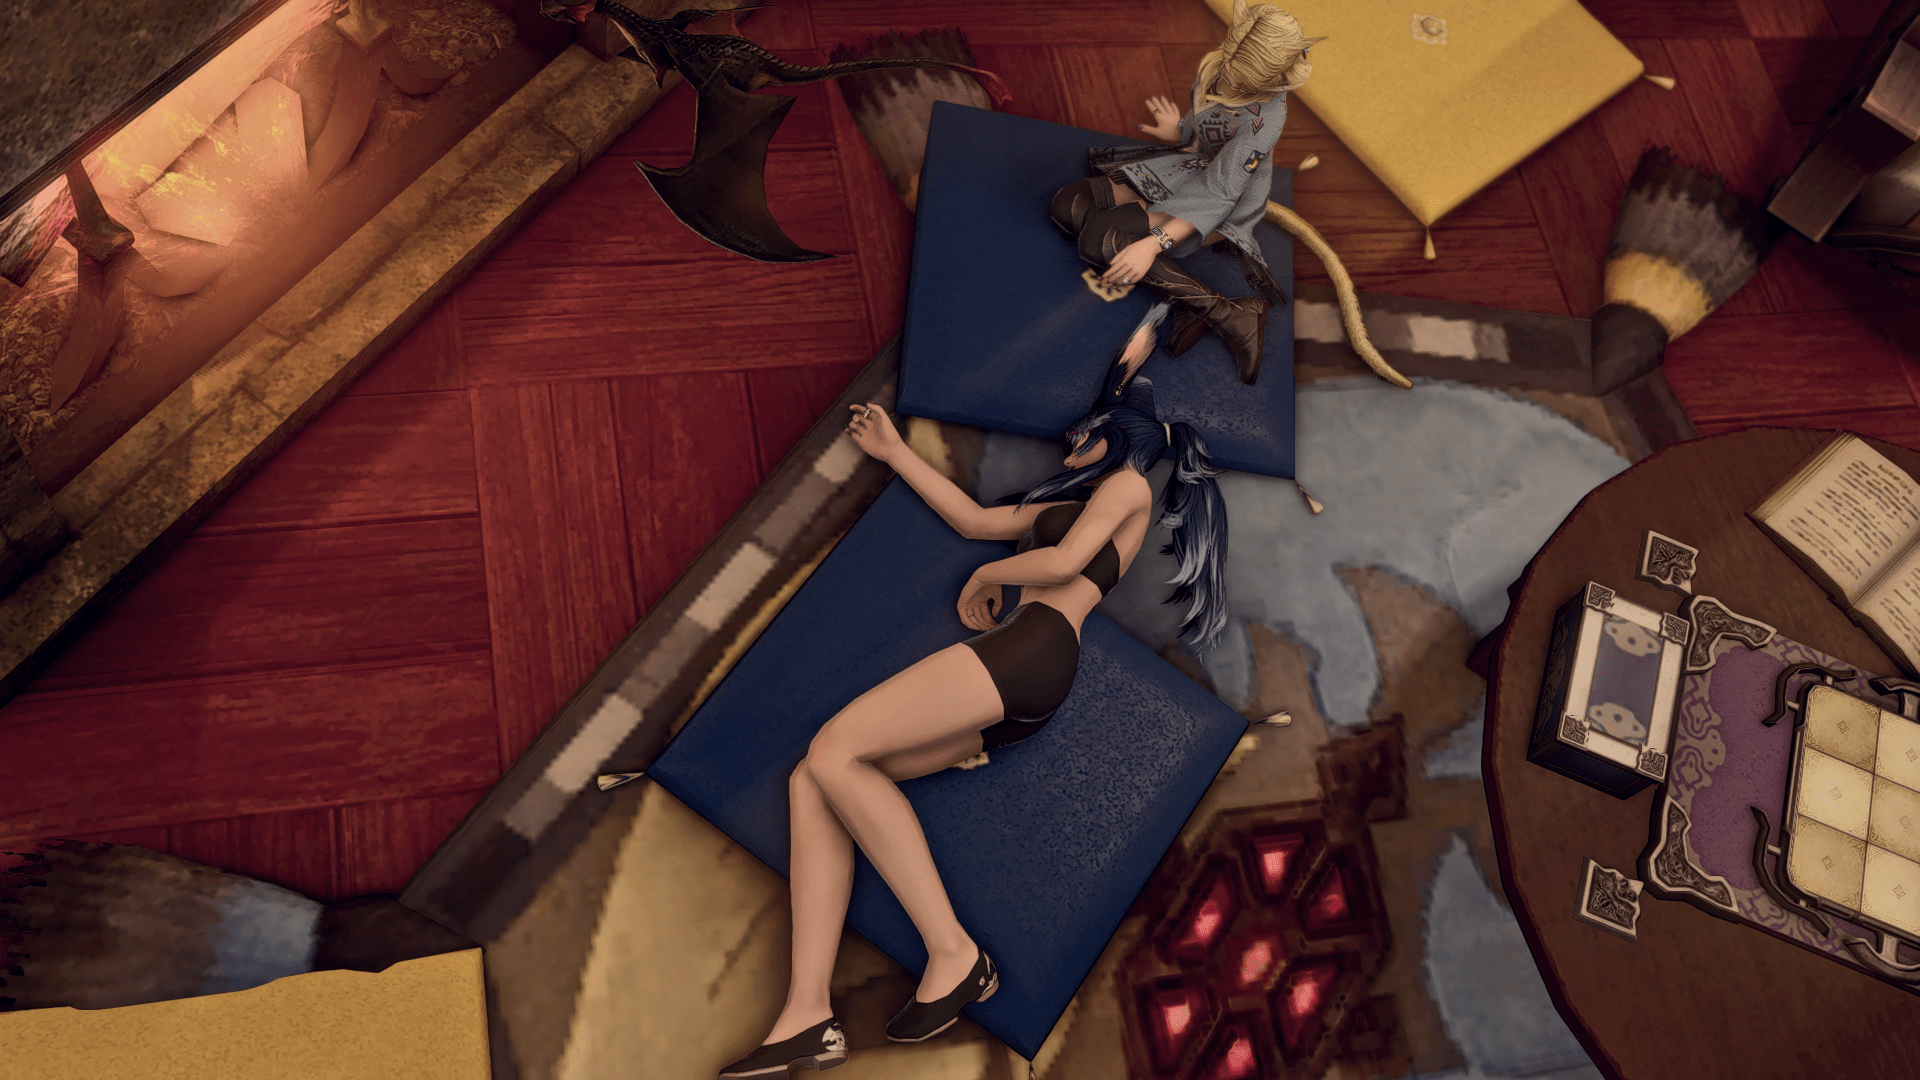 Me zonked out on several throw pillows in front of a fireplace while the Little One Looks at me in Final Fantasy XIV.